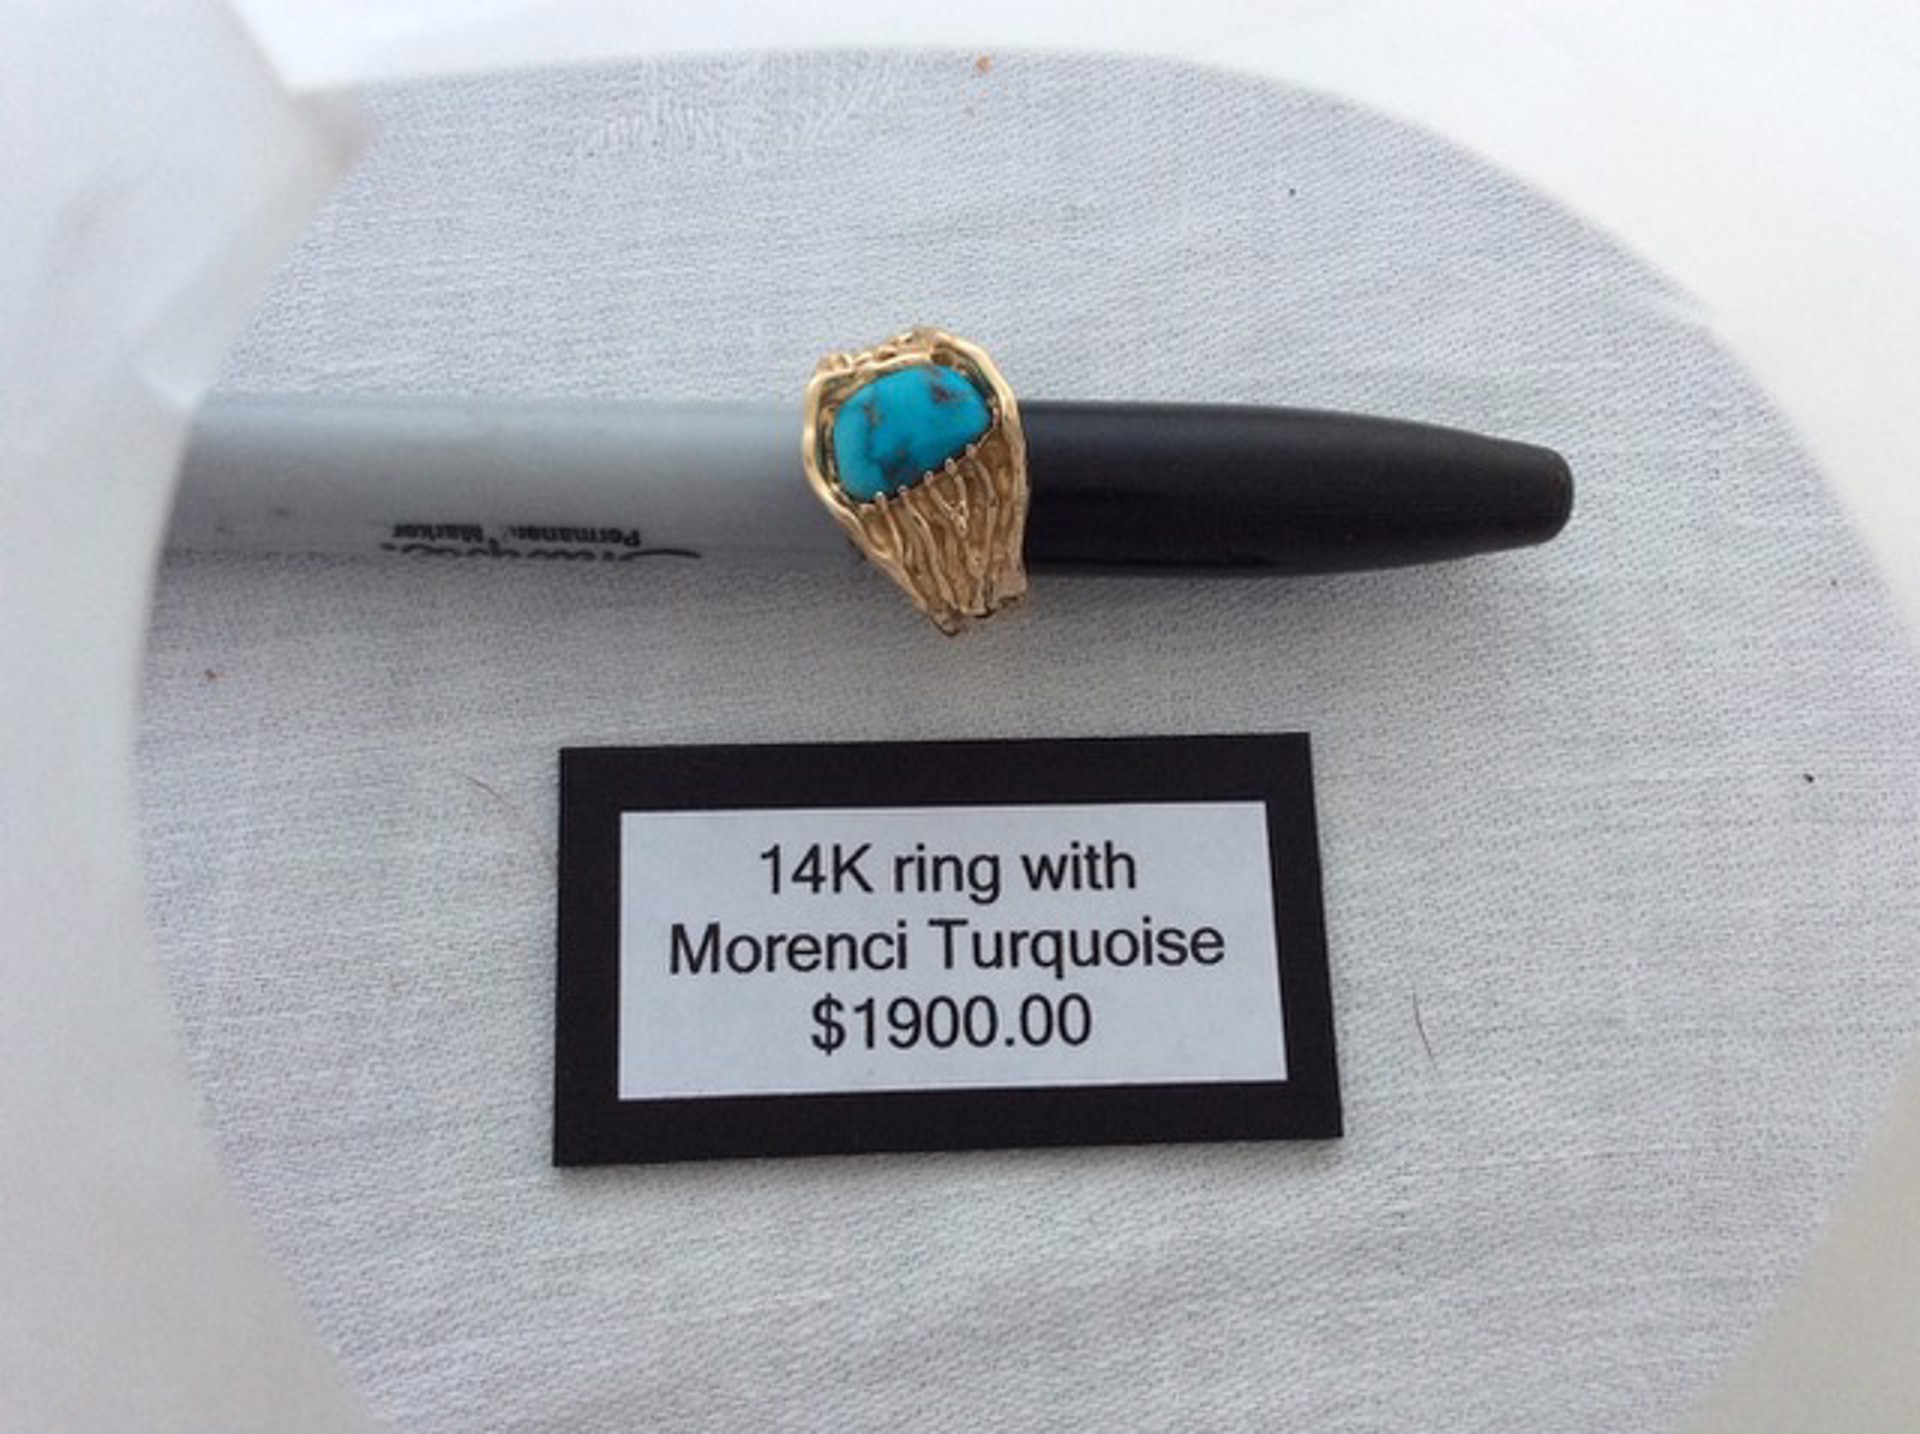 BKN 504 - Ring, 14K Gold with Morenci Turquoise by Ken and Barbara Newman